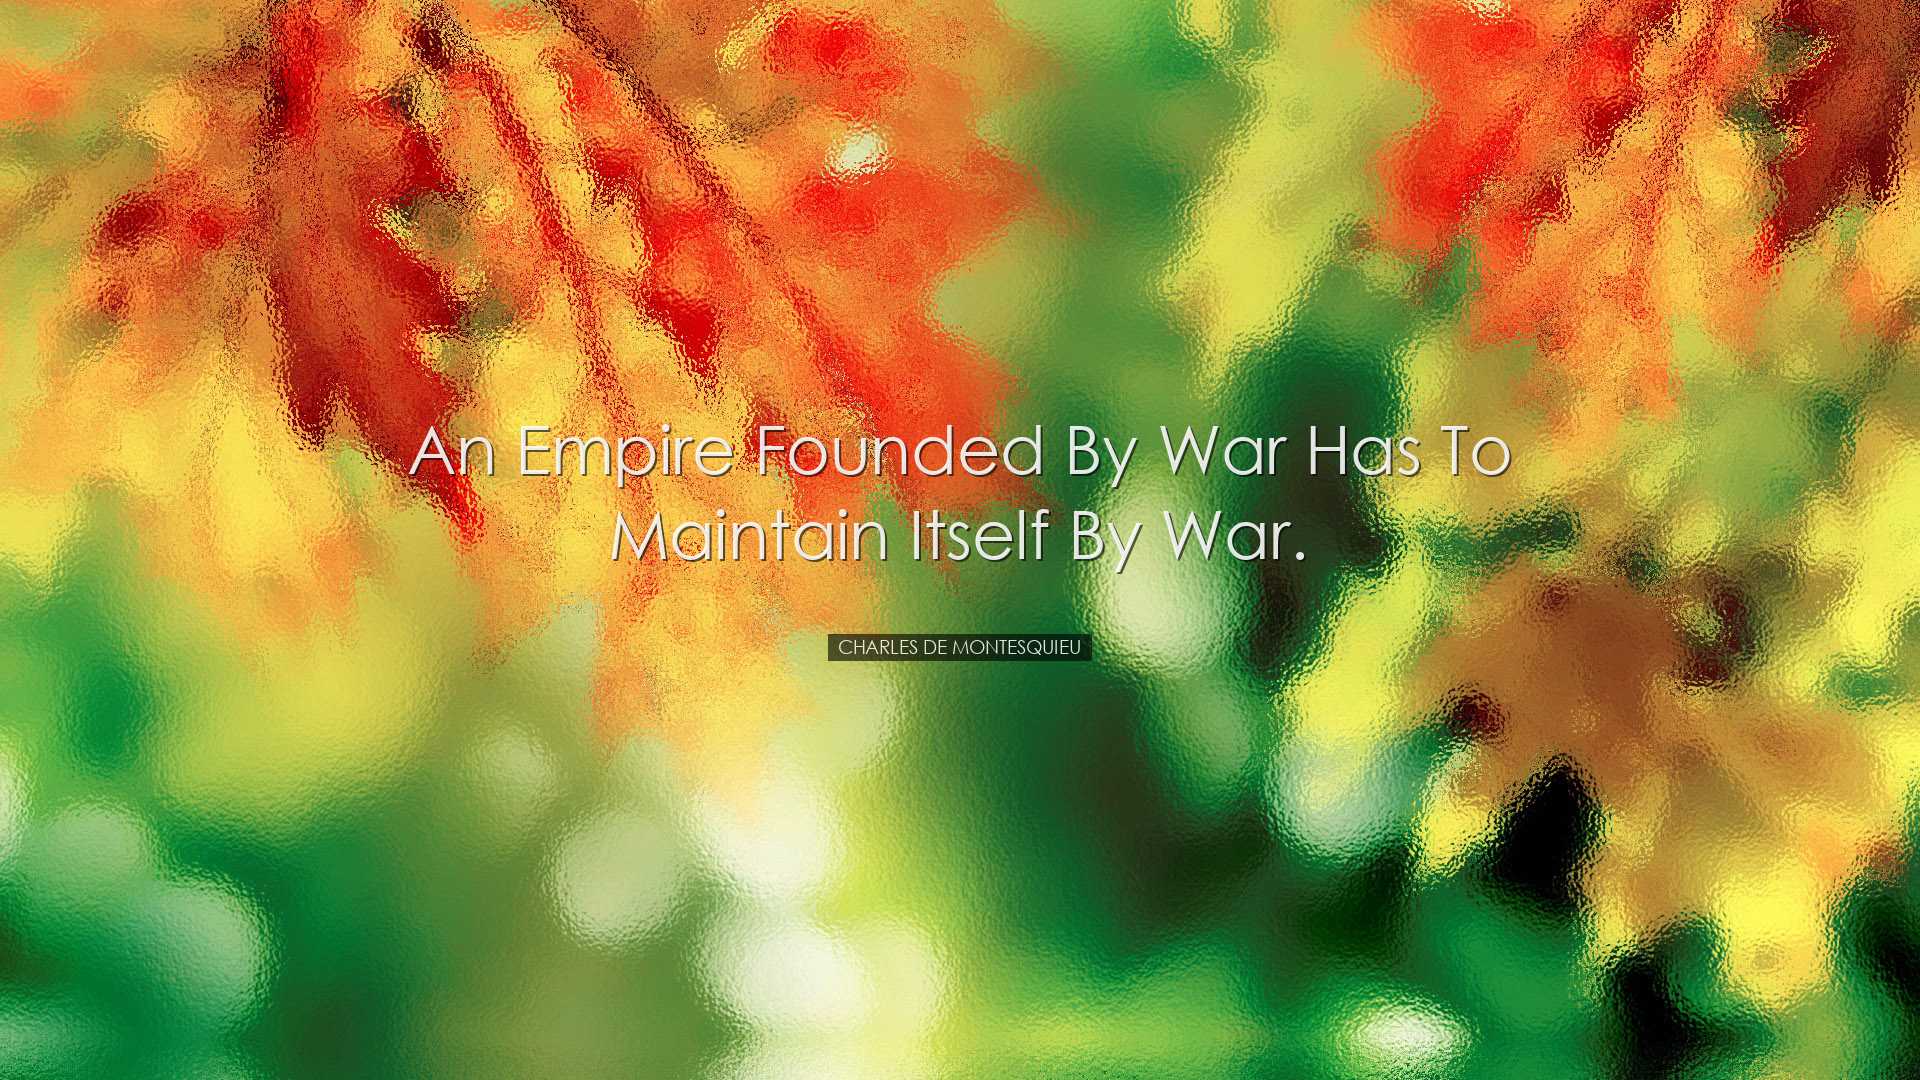 An empire founded by war has to maintain itself by war. - Charles